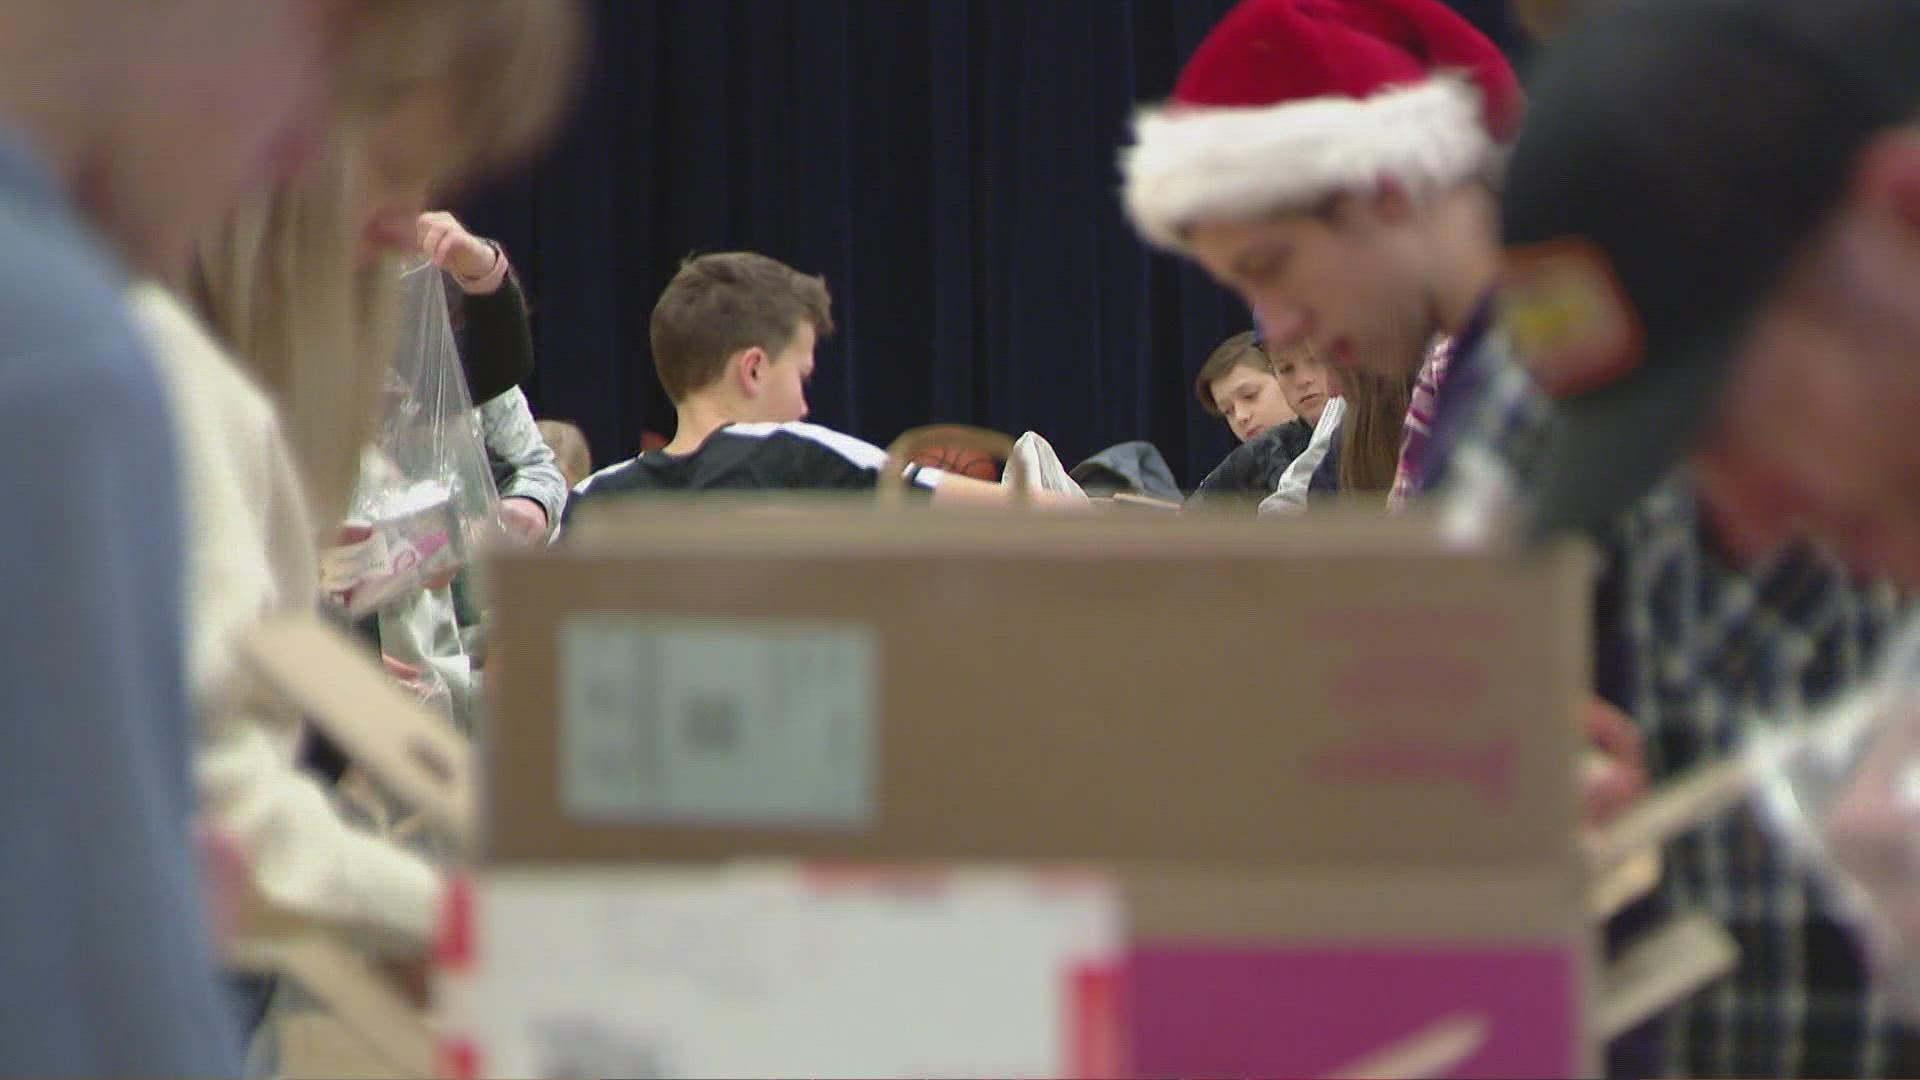 Ornaments will be handed out Saturday from 9 a.m. to 1 p.m. in Broomfield.